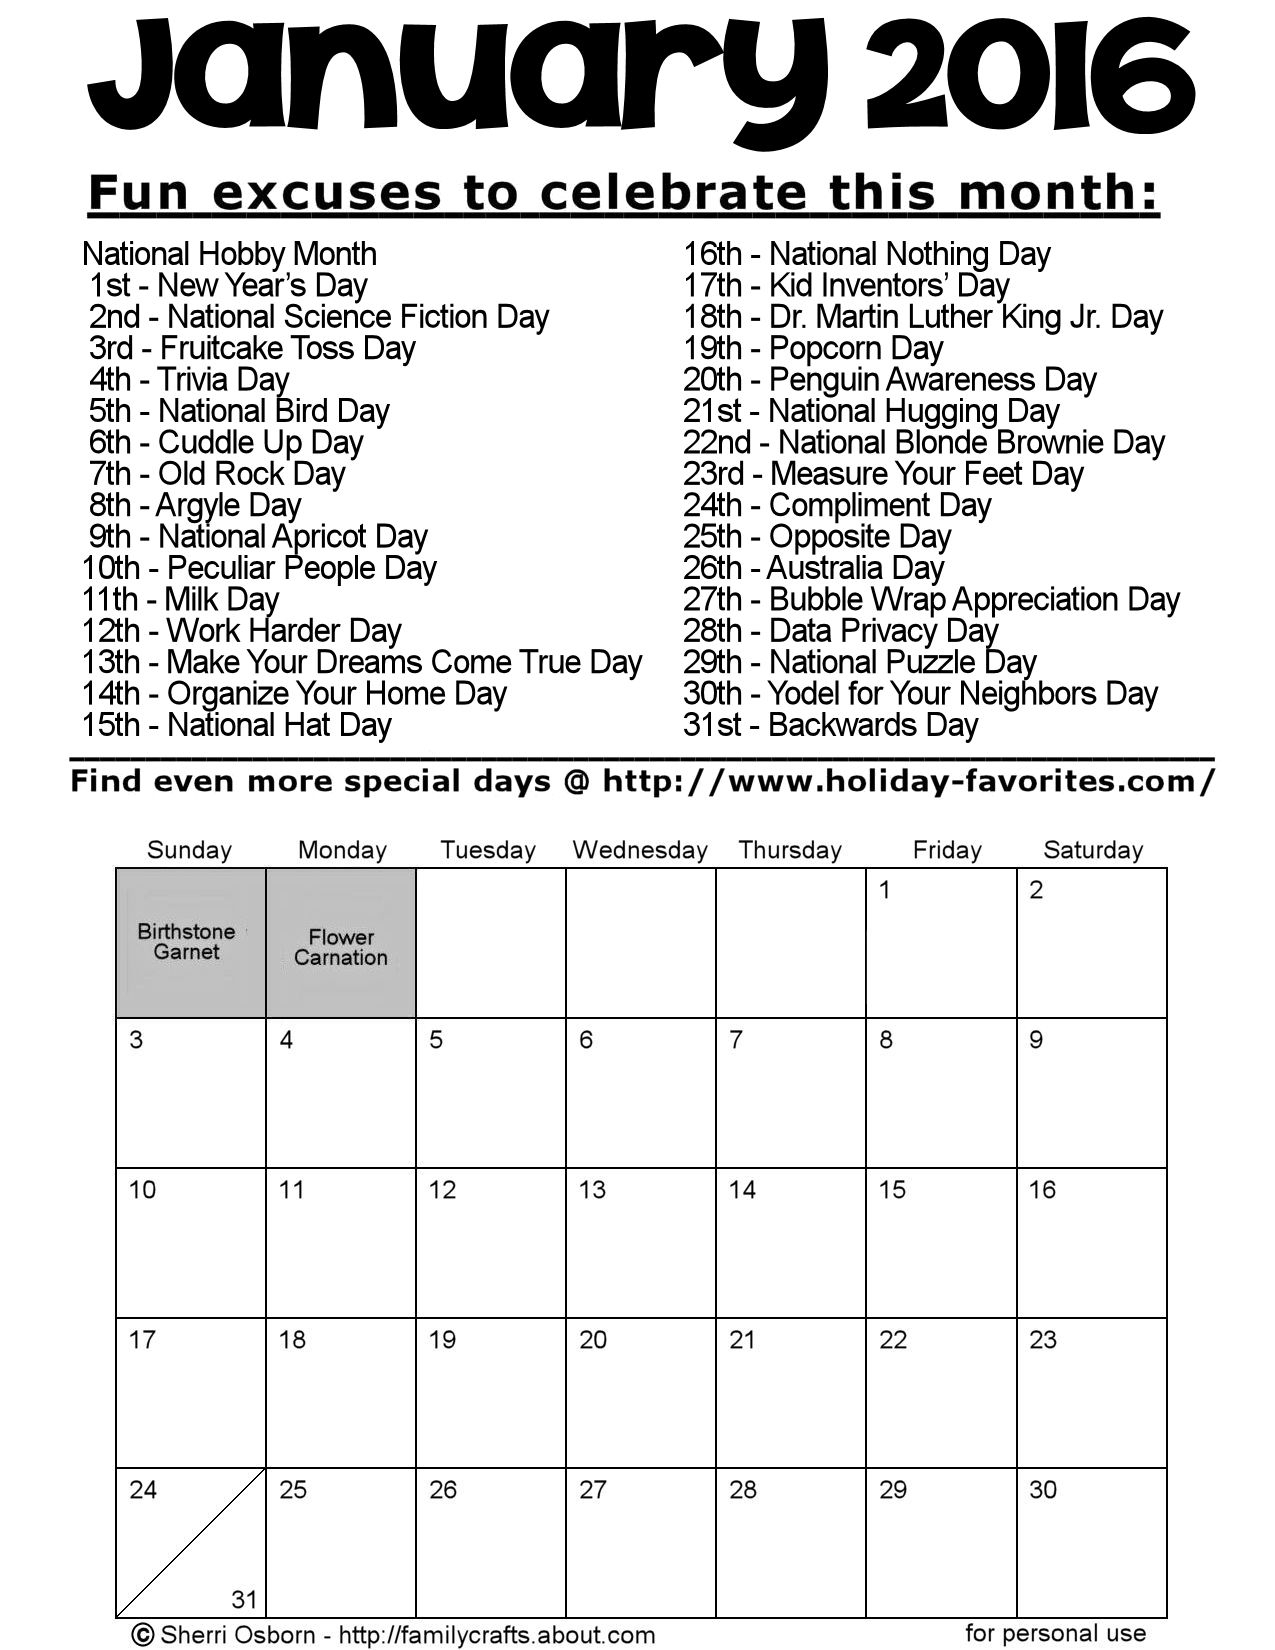 January-2016-Special-Days-Printable-Calendar | Holiday Favorites with regard to Calendar With All The Special Days